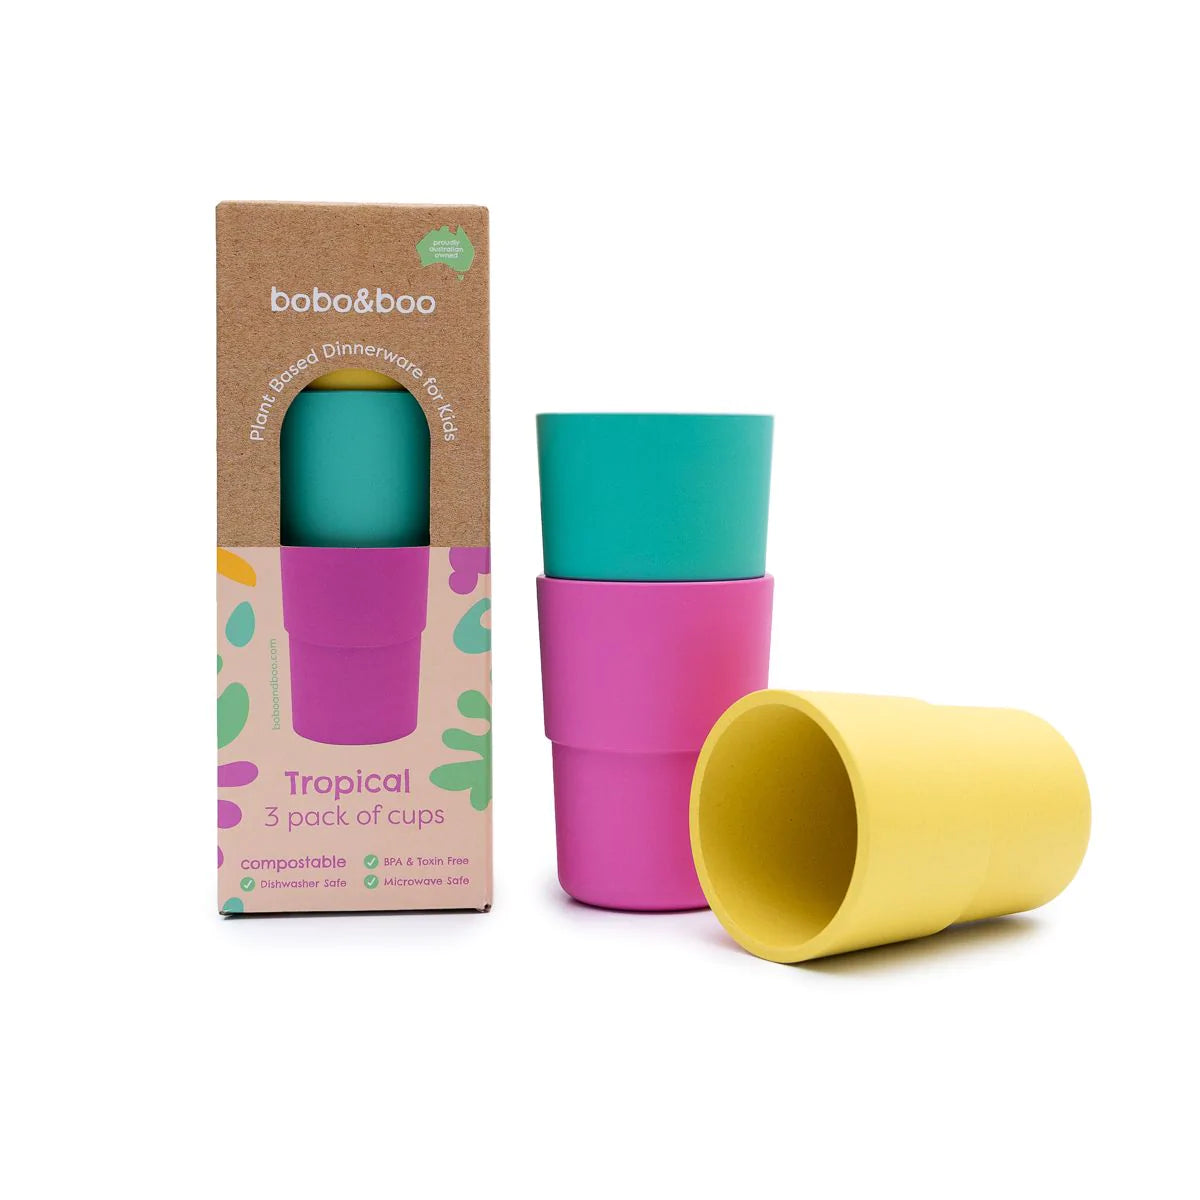 Bobo & Boo | Plant-Based 3 Pack of Cups - Tropical (300ml)